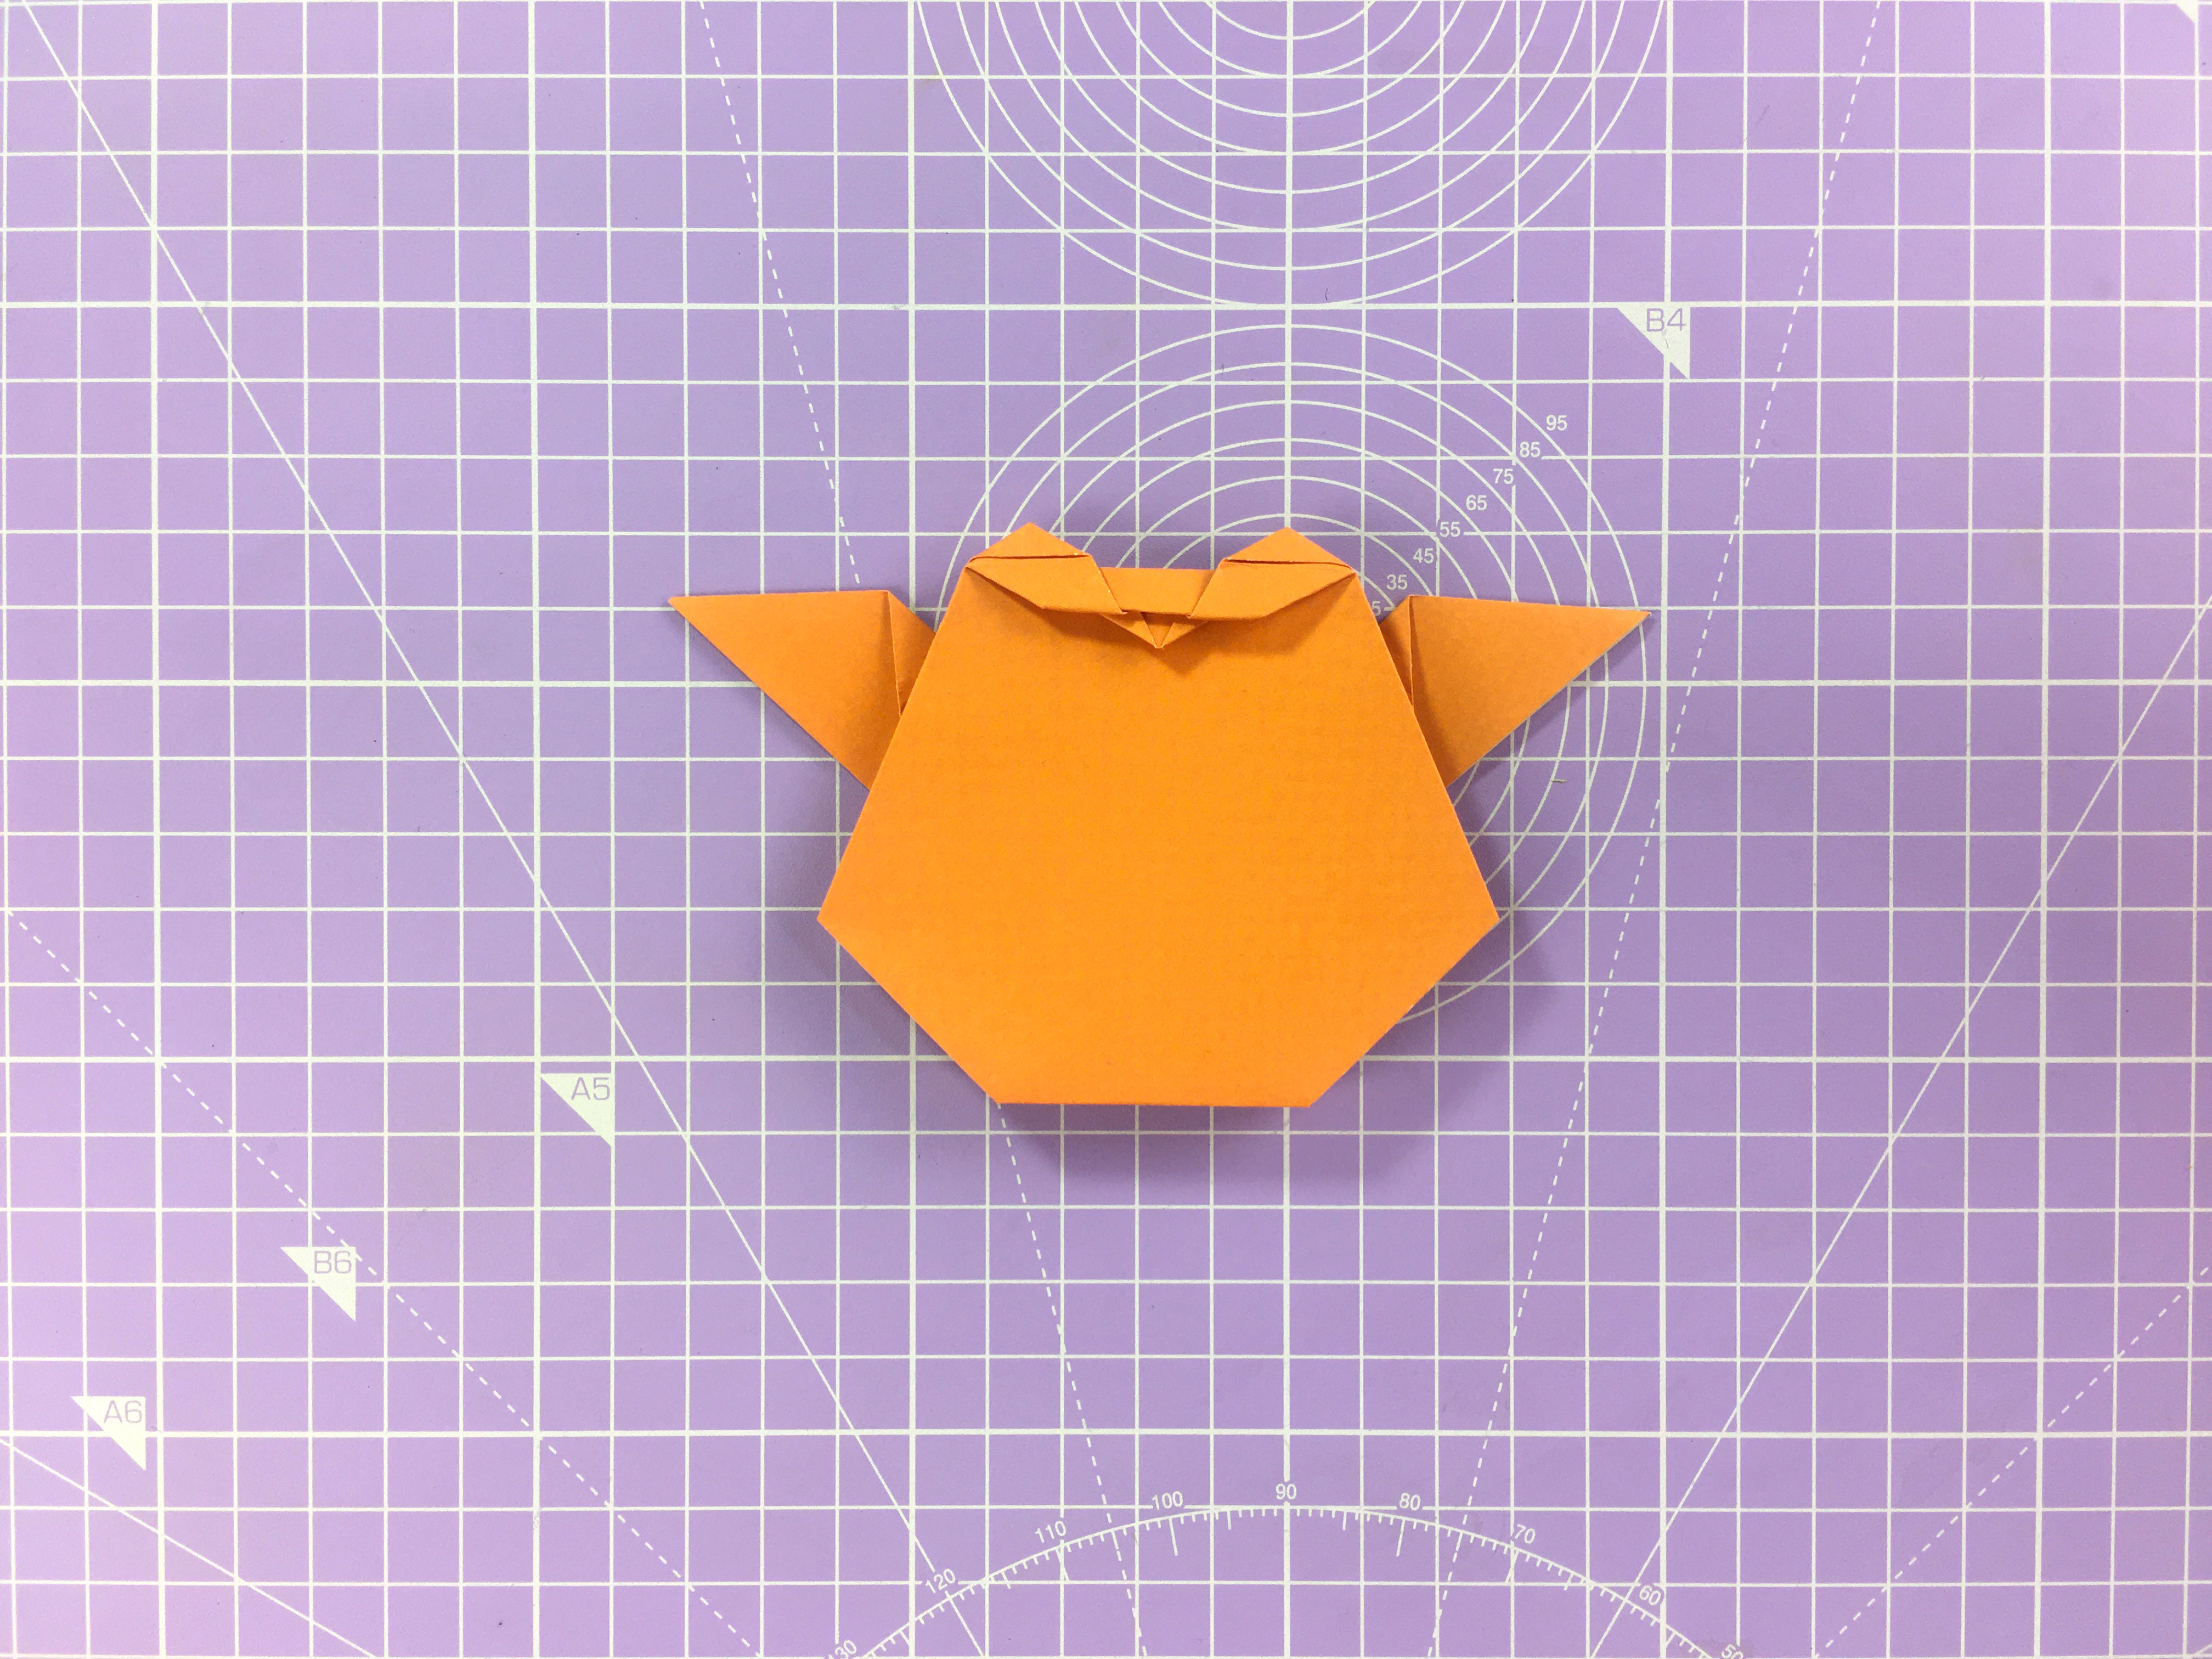 How to Make Your Own Origami Paper : 6 Steps (with Pictures